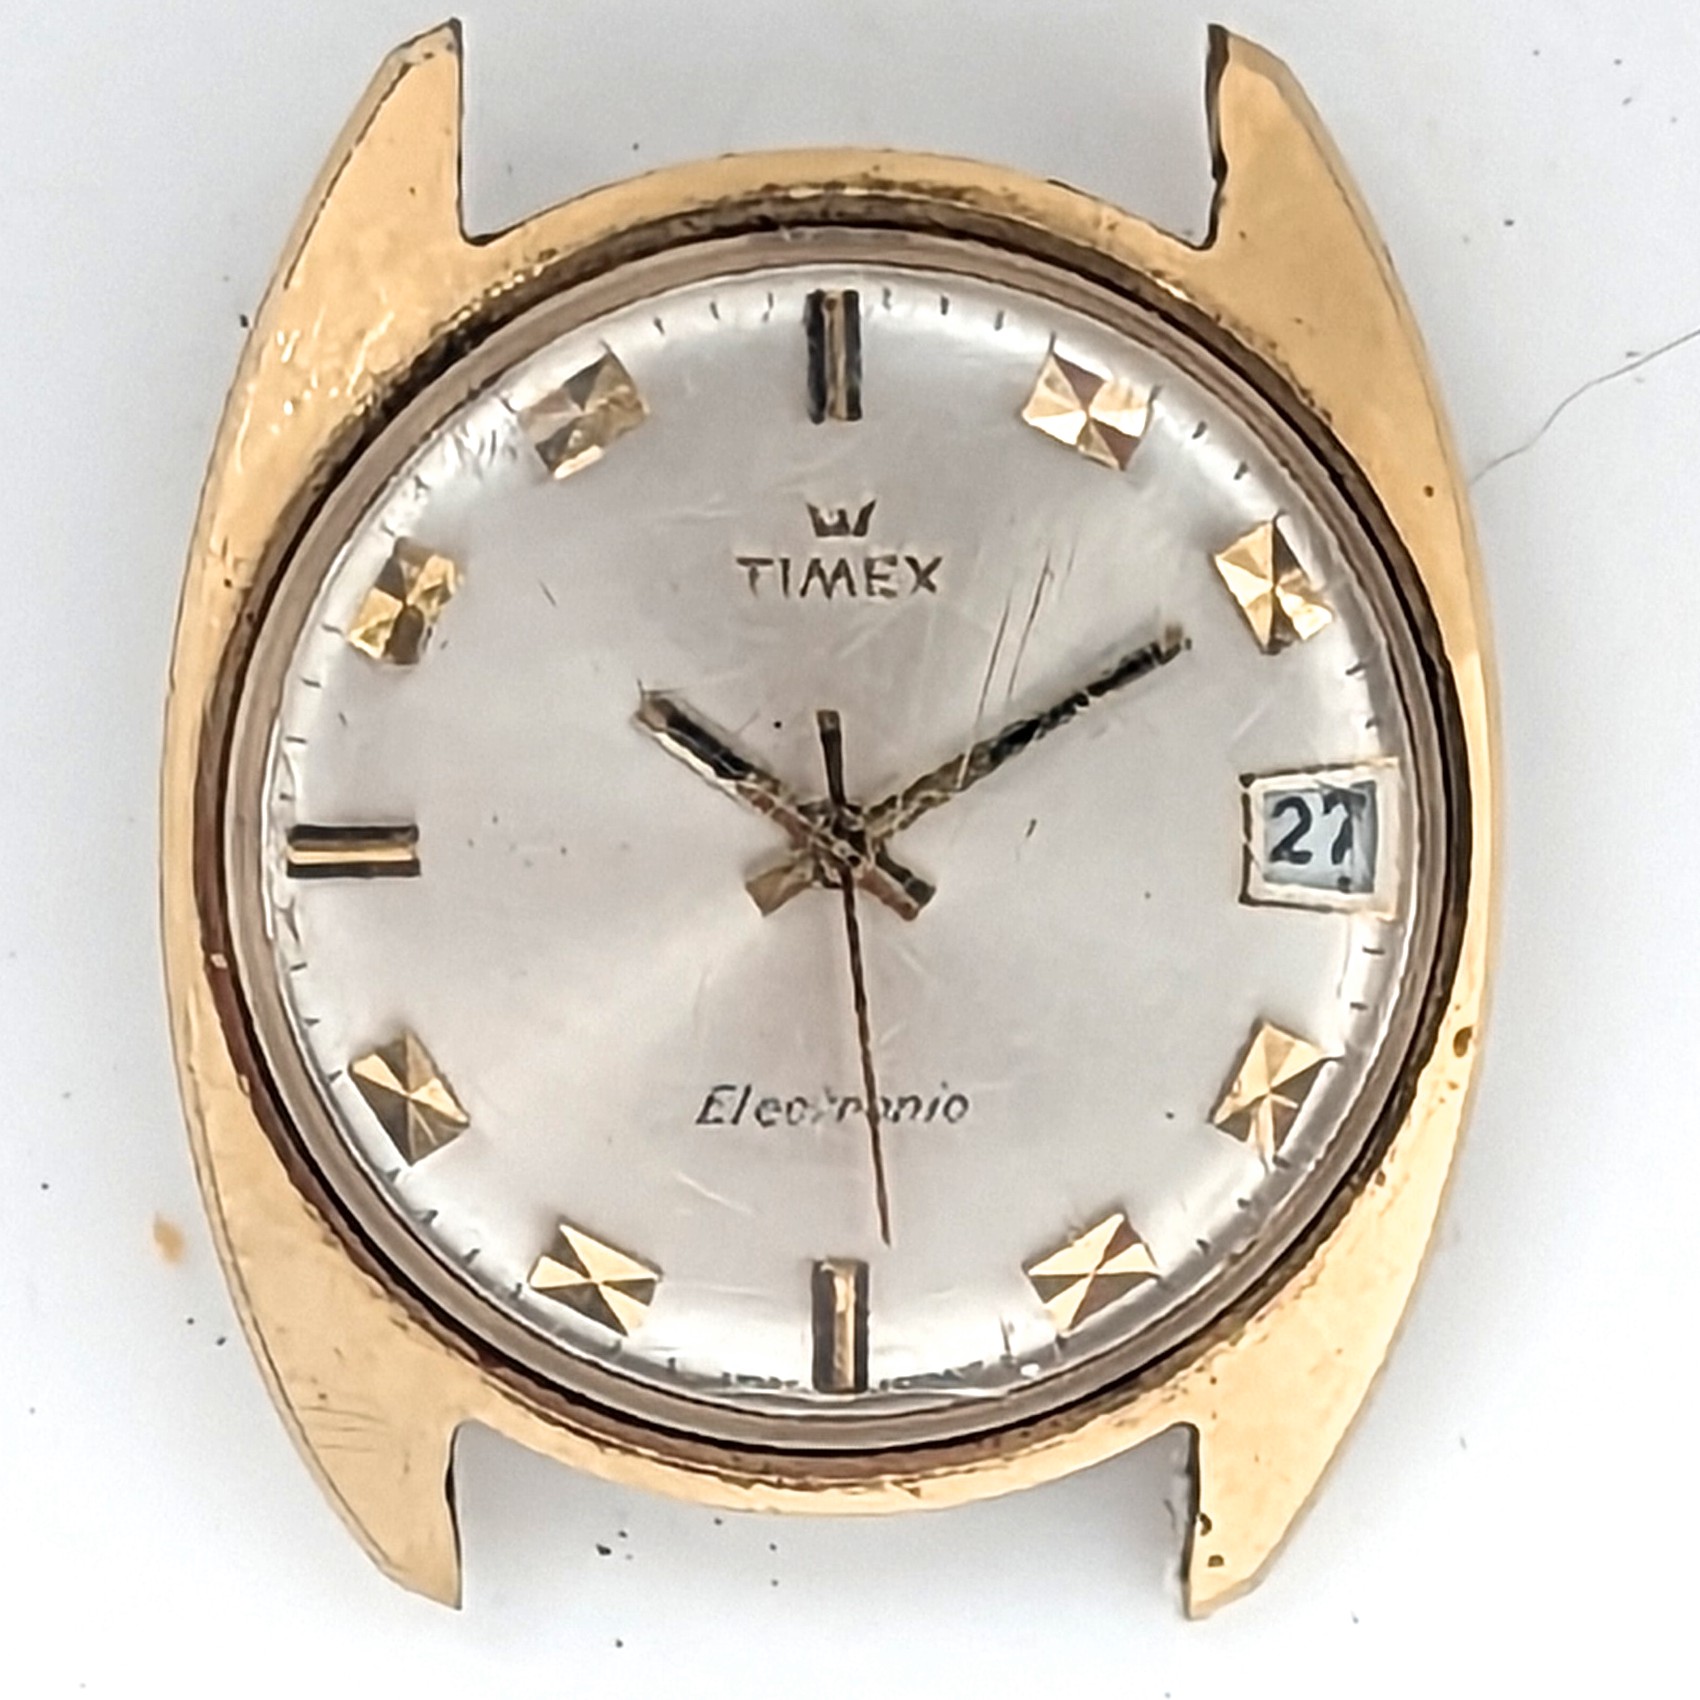 Timex Electronic 9924 8769 / 8770 [1969 / 1970]